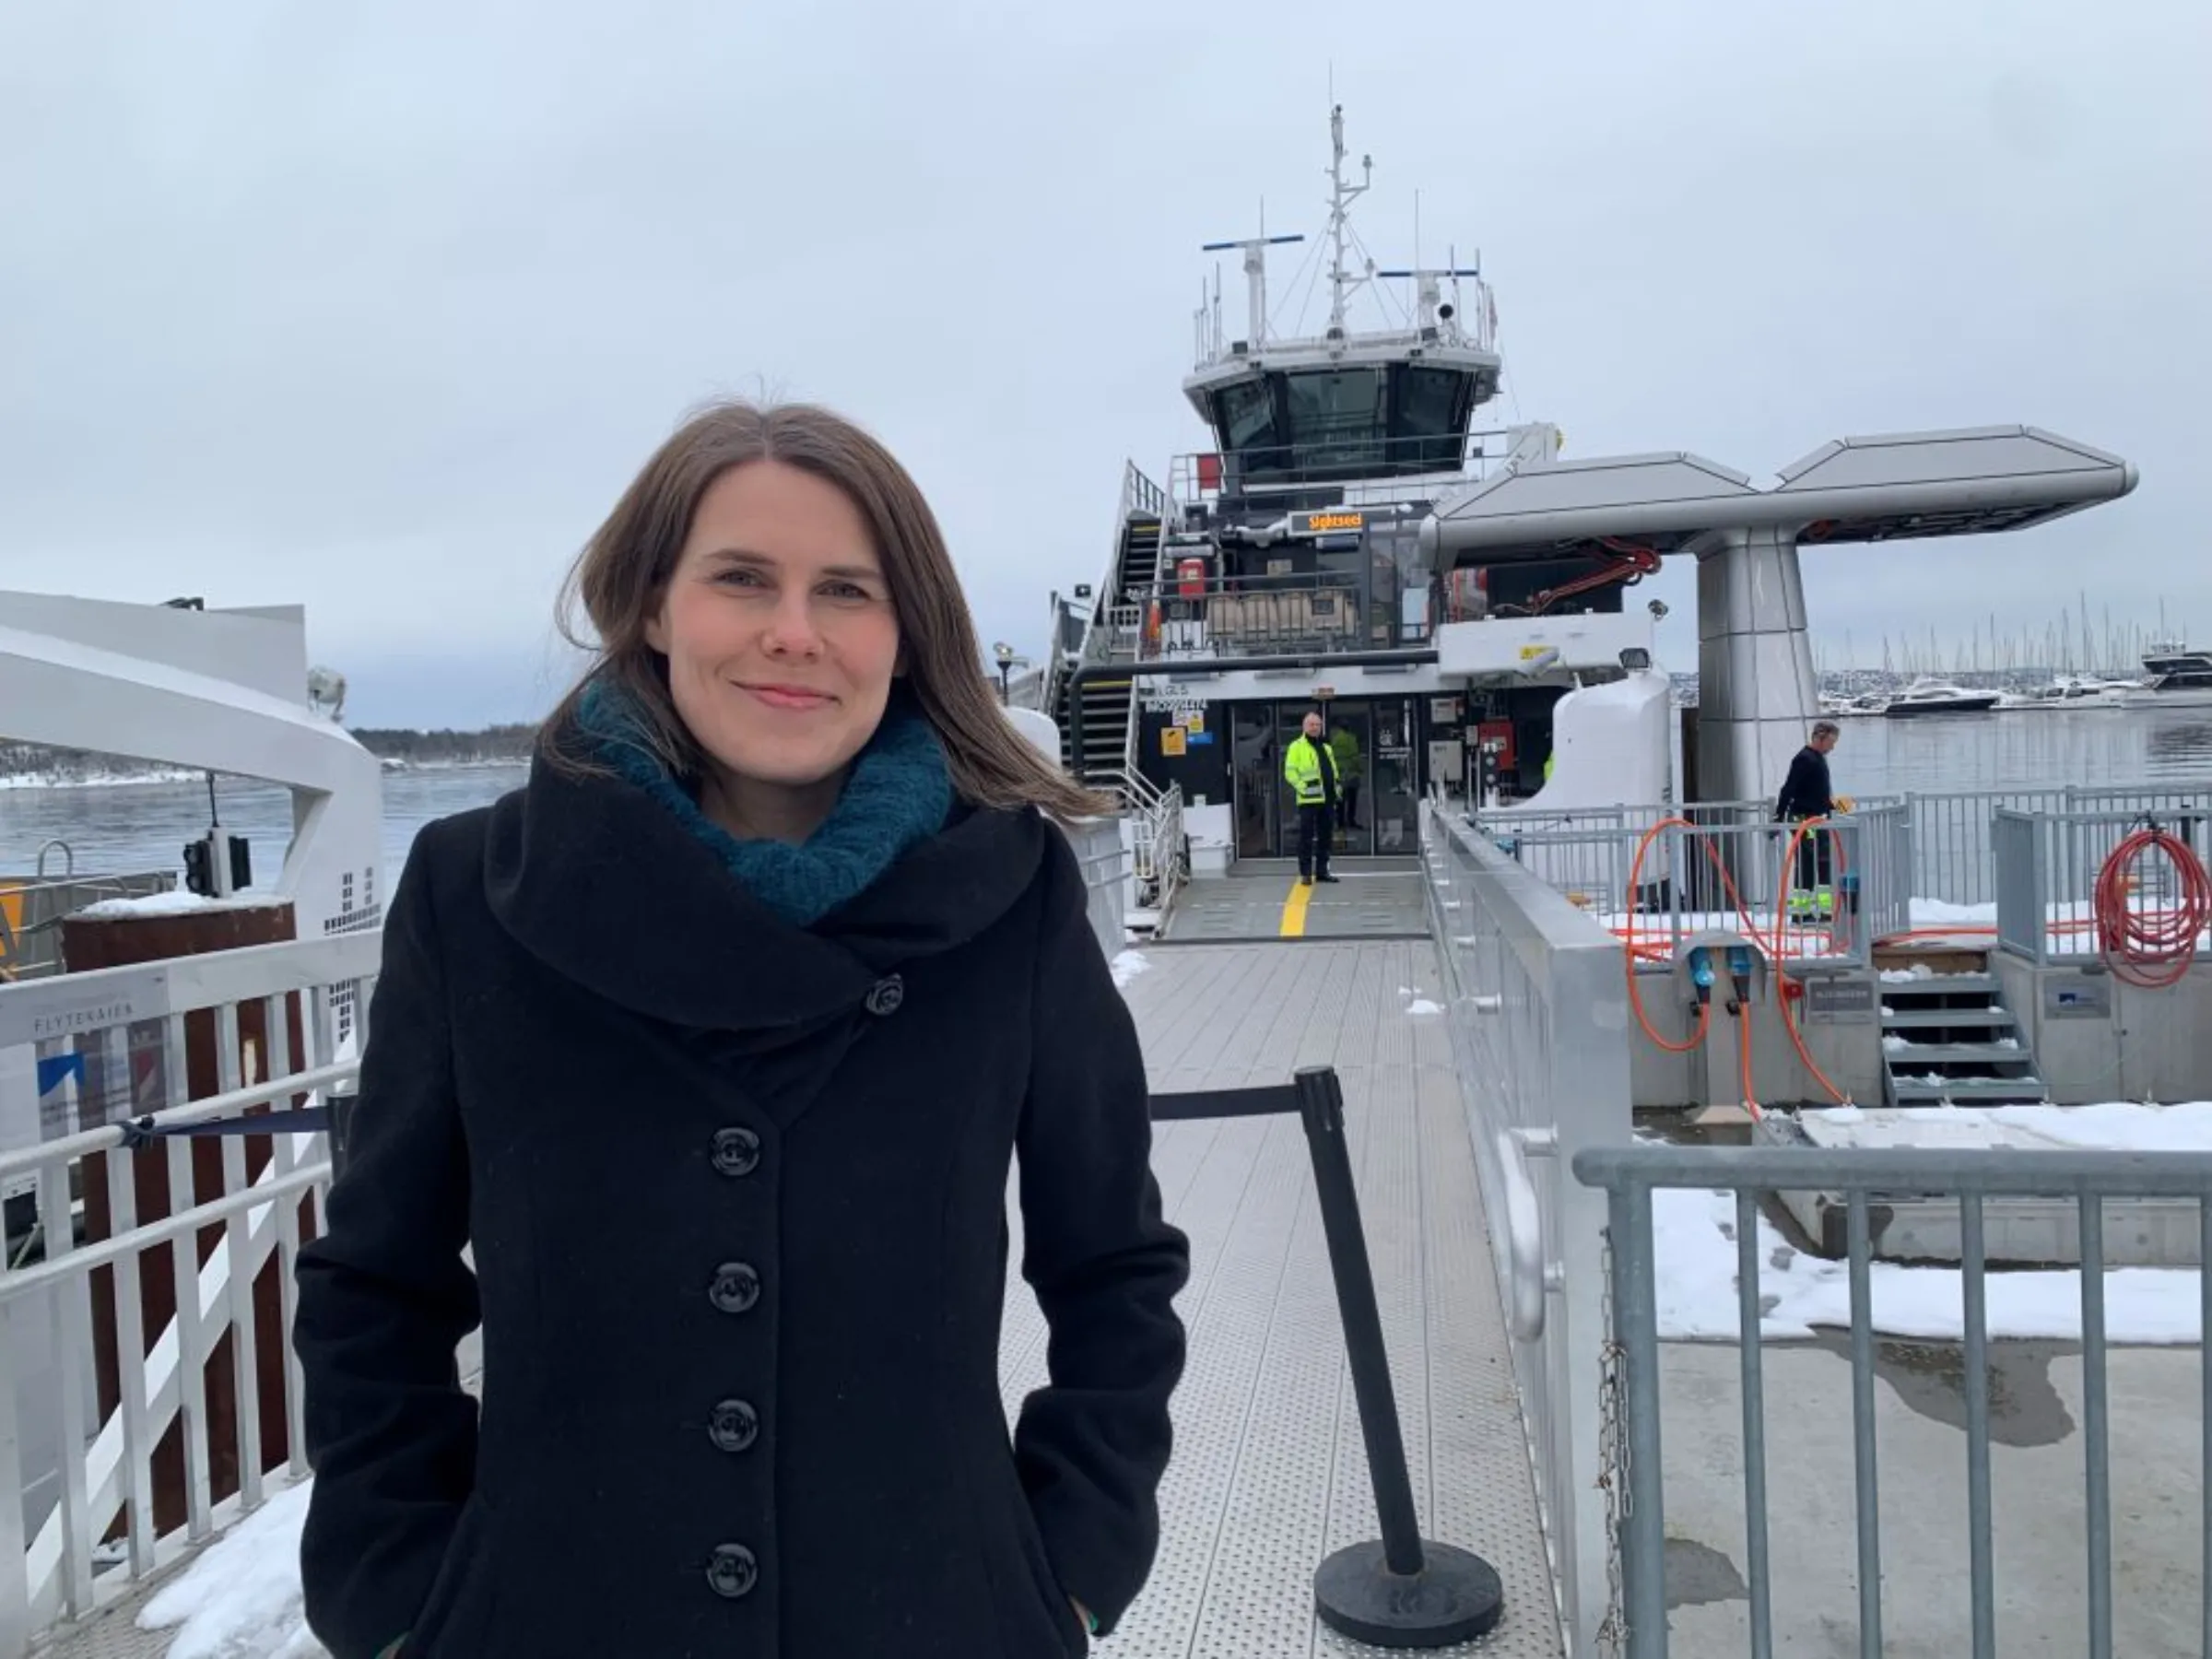 Sirin Hellvin Stav, Oslo’s vice mayor for environment and transport, stands at a terminal for electric ferries travelling across the fjord, March 16, 2023. Oslo is set this year to become the first capital city with only electric public transport.